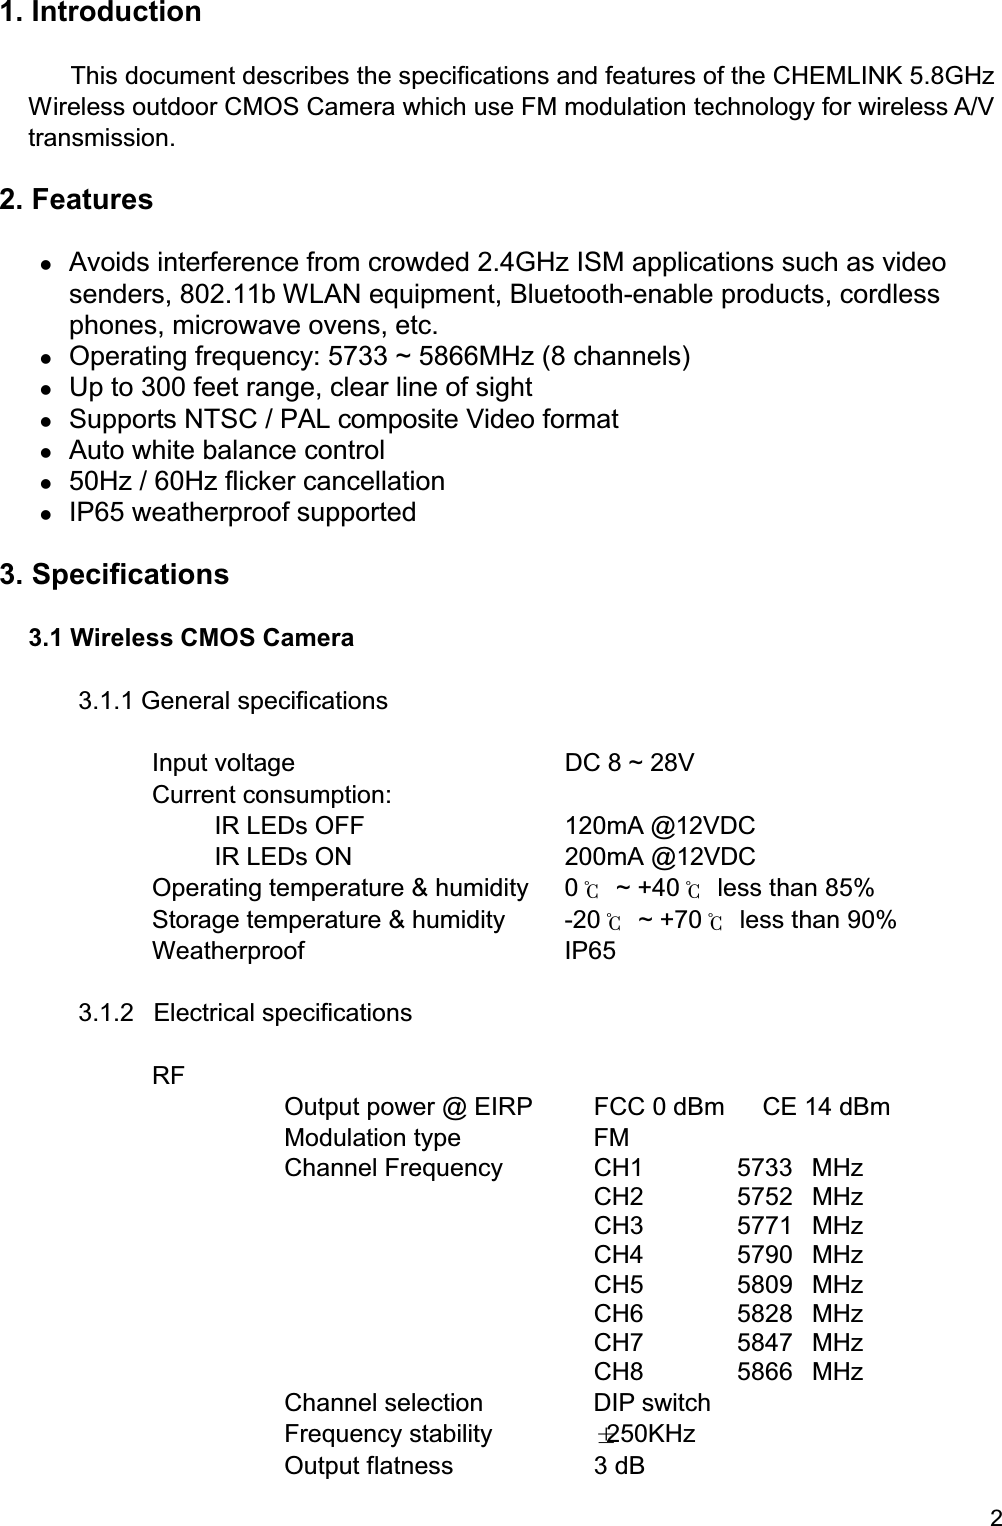 21. Introduction  This document describes the specifications and features of the CHEMLINK 5.8GHz Wireless outdoor CMOS Camera which use FM modulation technology for wireless A/Vtransmission.2. Features Avoids interference from crowded 2.4GHz ISM applications such as videosenders, 802.11b WLAN equipment, Bluetooth-enable products, cordlessphones, microwave ovens, etc. Operating frequency: 5733 ~ 5866MHz (8 channels) Up to 300 feet range, clear line of sight Supports NTSC / PAL composite Video format Auto white balance control 50Hz / 60Hz flicker cancellation IP65 weatherproof supported3. Specifications3.1 Wireless CMOS Camera3.1.1 General specificationsInput voltage DC 8 ~ 28VCurrent consumption:IR LEDs OFF 120mA @12VDC     IR LEDs ON 200mA @12VDCOperating temperature &amp; humidity 0℃ ~ +40℃  less than 85%Storage temperature &amp; humidity -20℃ ~ +70℃  less than 90%Weatherproof IP653.1.2 Electrical specificationsRFOutput power @ EIRP FCC 0 dBm      CE 14 dBmModulation type FMChannel Frequency CH1 5733 MHzCH2 5752 MHzCH3 5771 MHzCH4 5790 MHzCH5 5809 MHzCH6 5828 MHzCH7 5847 MHzCH8 5866 MHzChannel selection DIP switchFrequency stability ±250KHzOutput flatness 3 dB